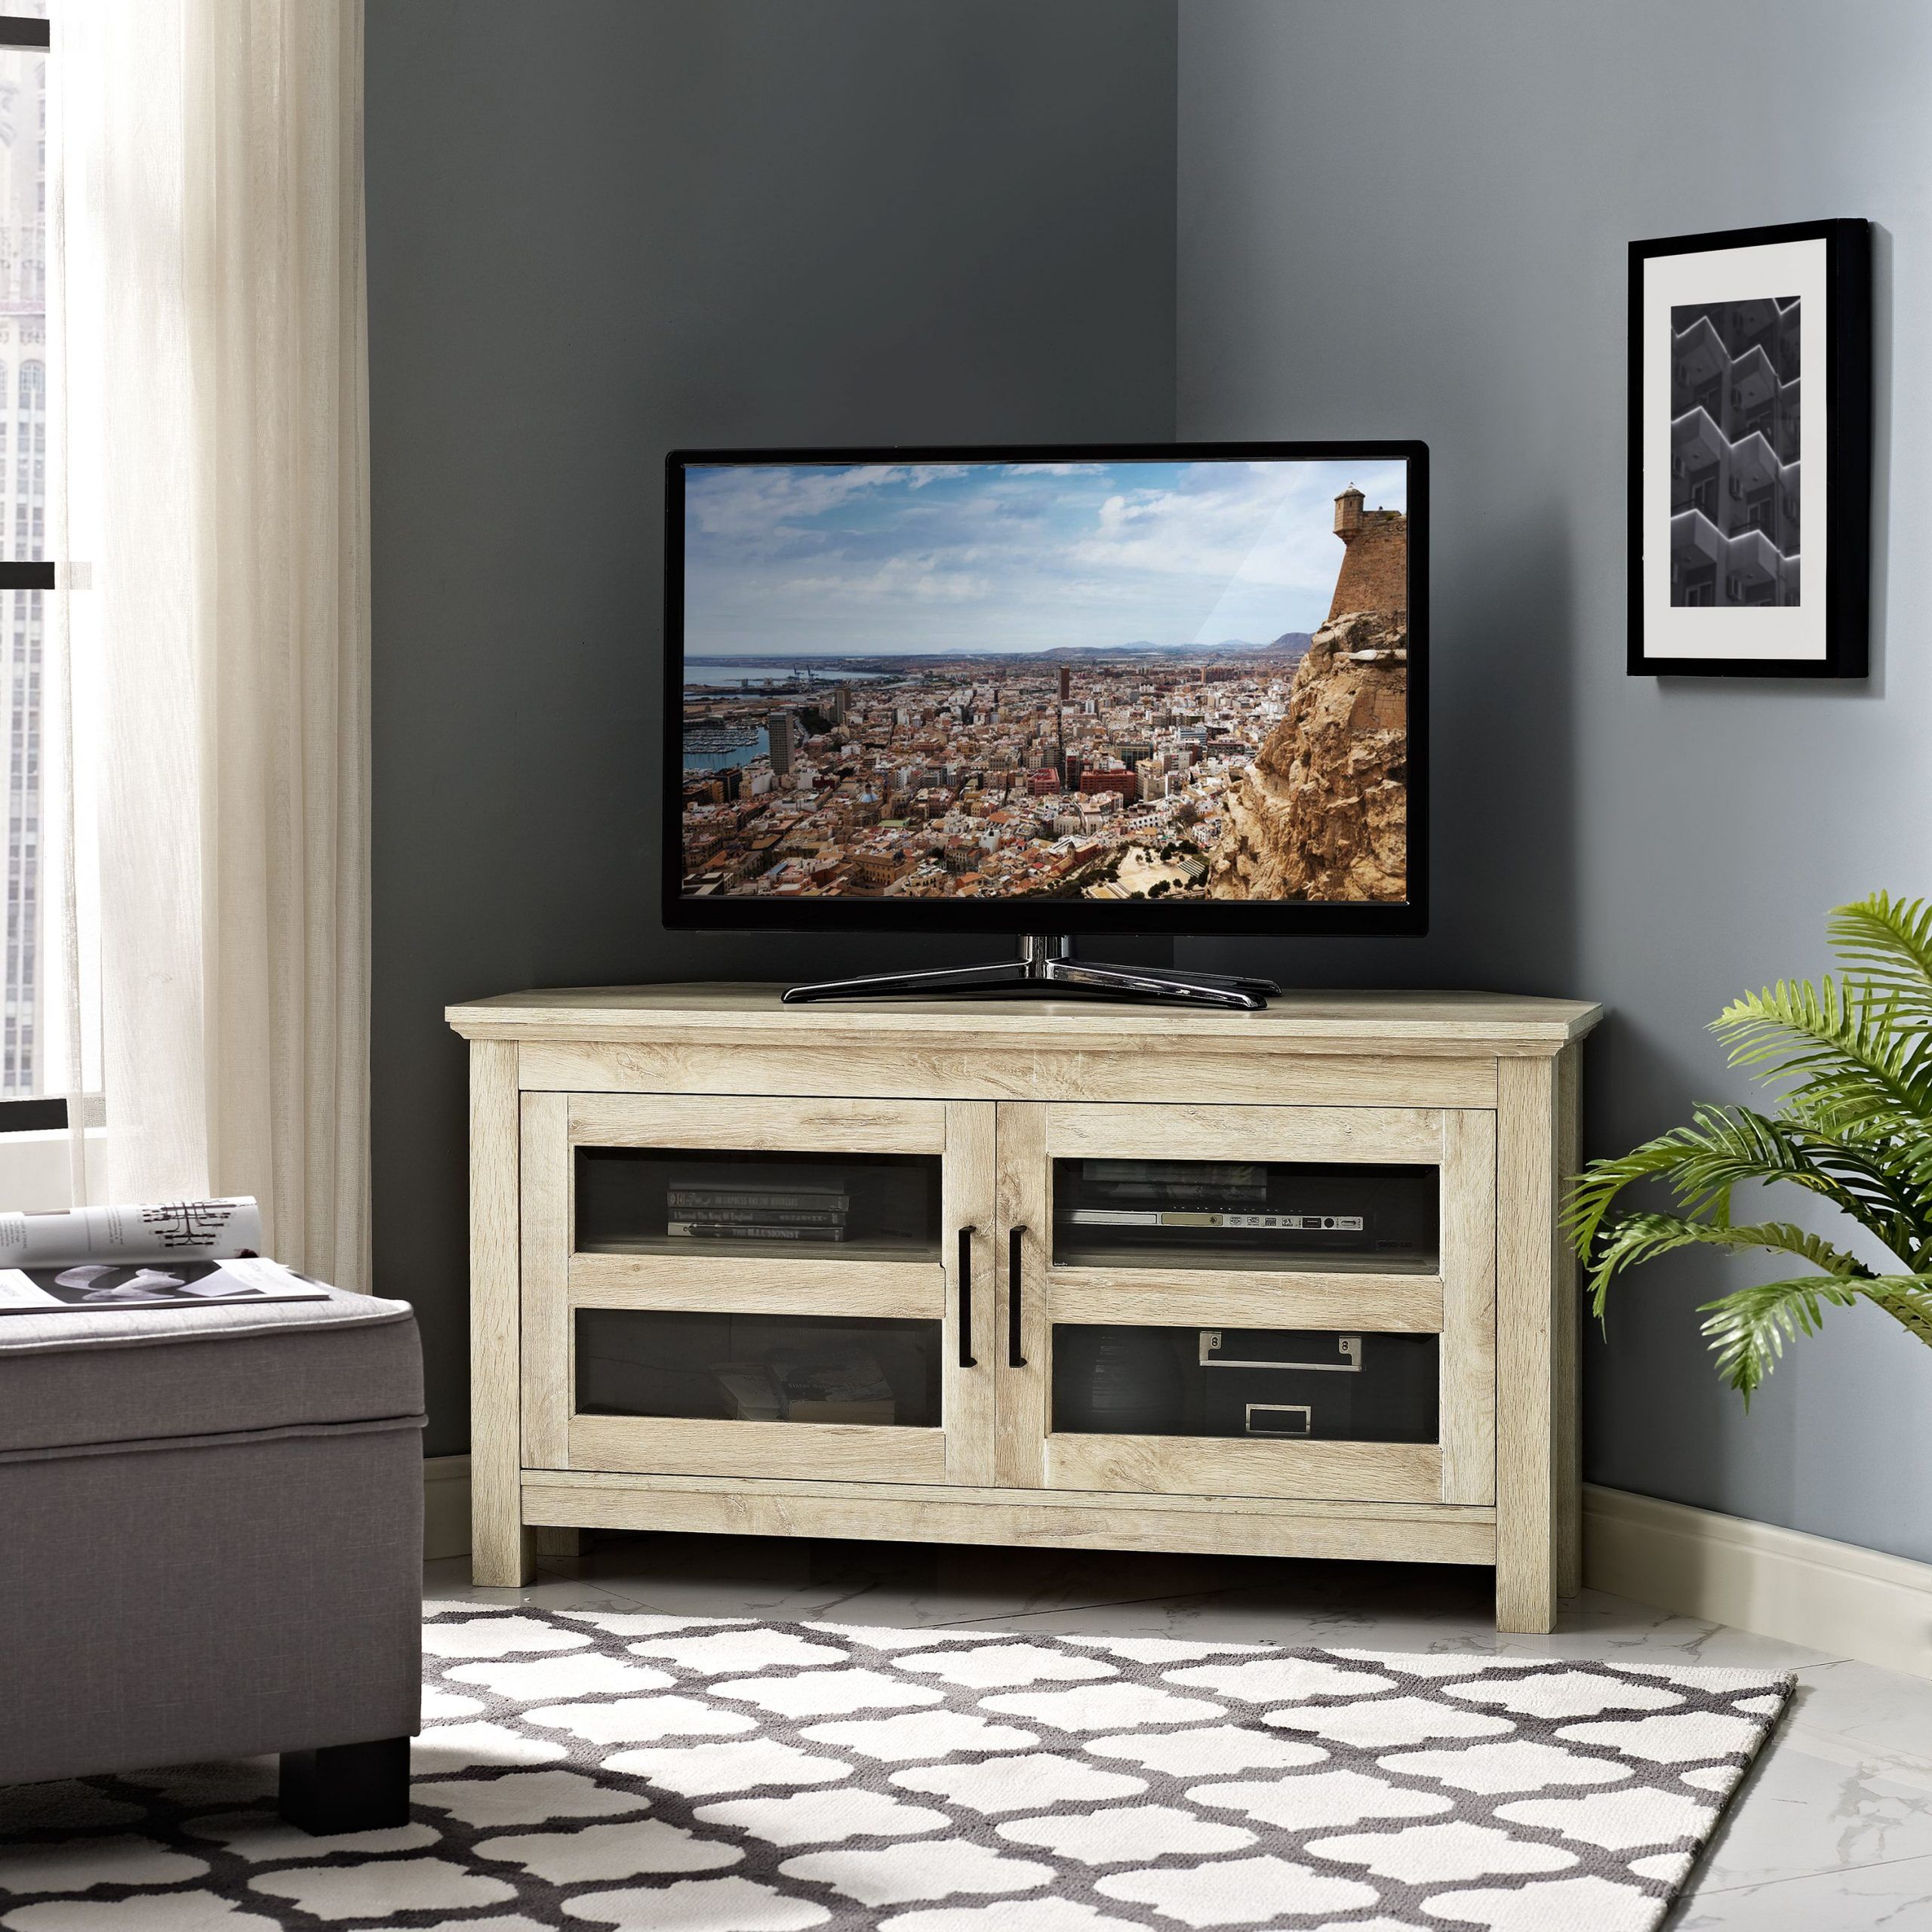 Walker Edison Wood Corner Tv Stand For Tvs Up To 48 With Regard To Oak Corner Tv Stands (View 2 of 28)